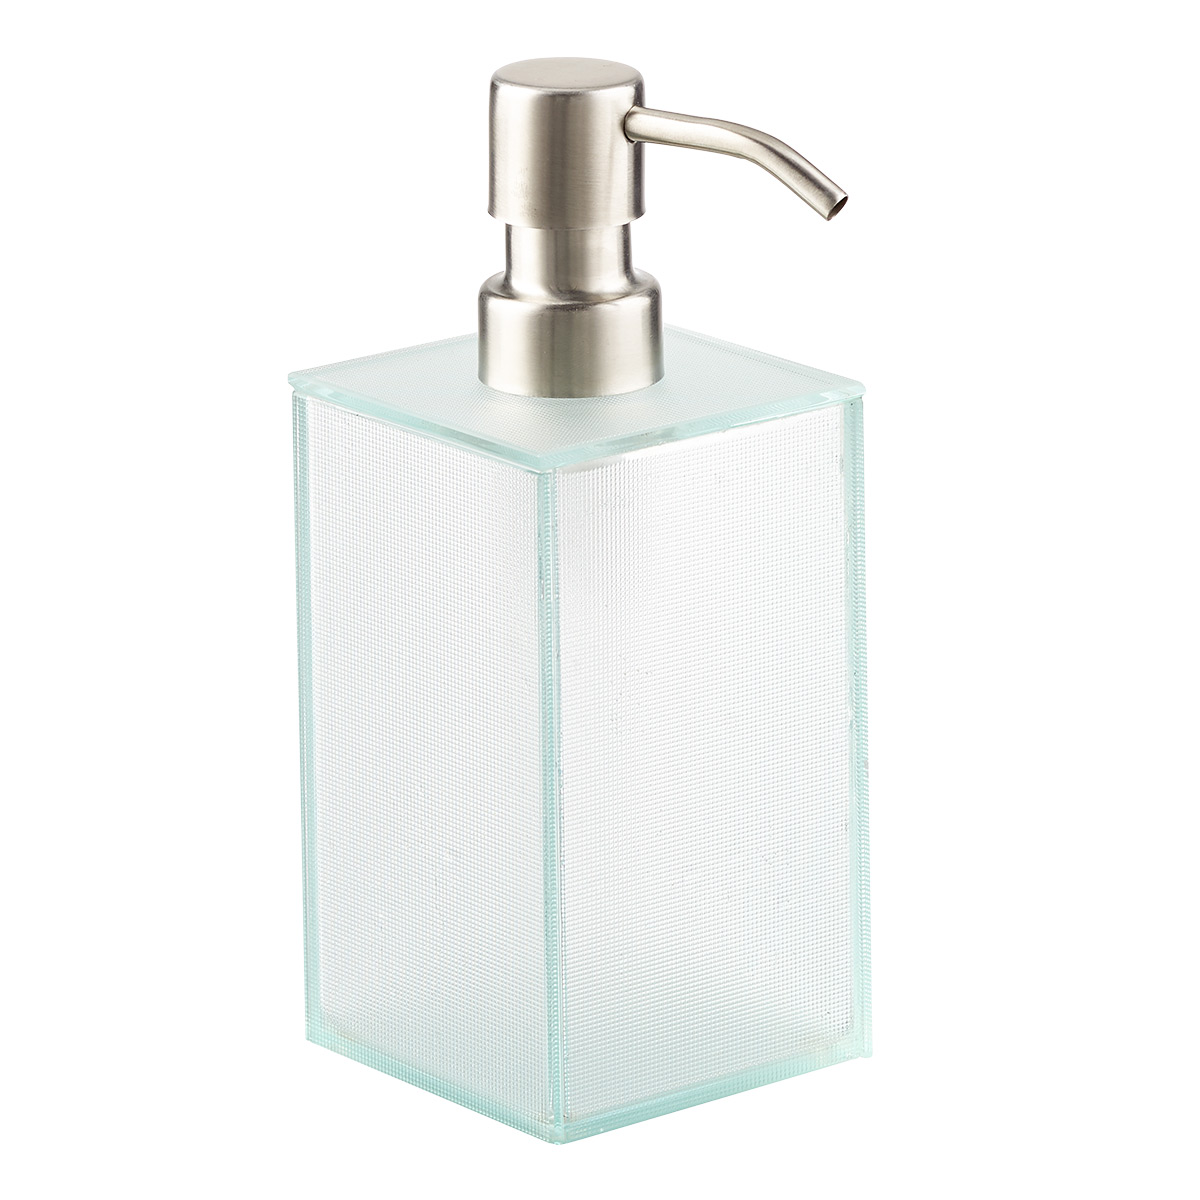 https://www.containerstore.com/catalogimages/390837/10081039-Design-Ideas-dimpled-glass-.jpg